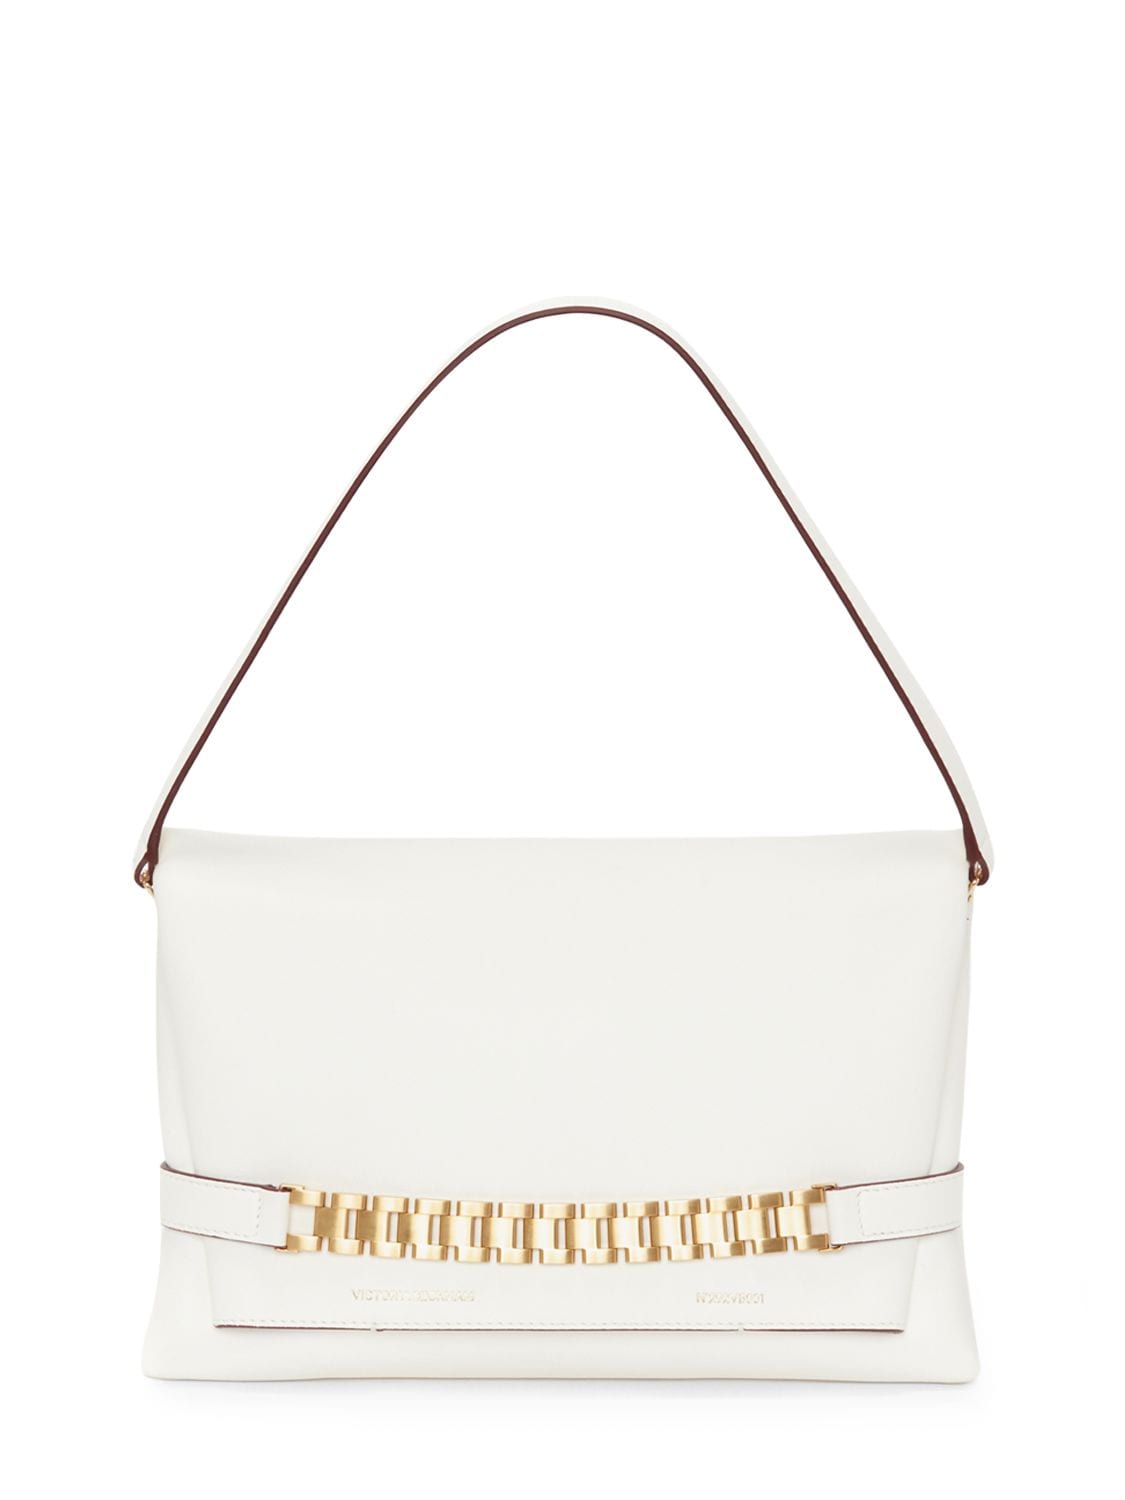 Victoria Beckham Chain Leather Pouch In White